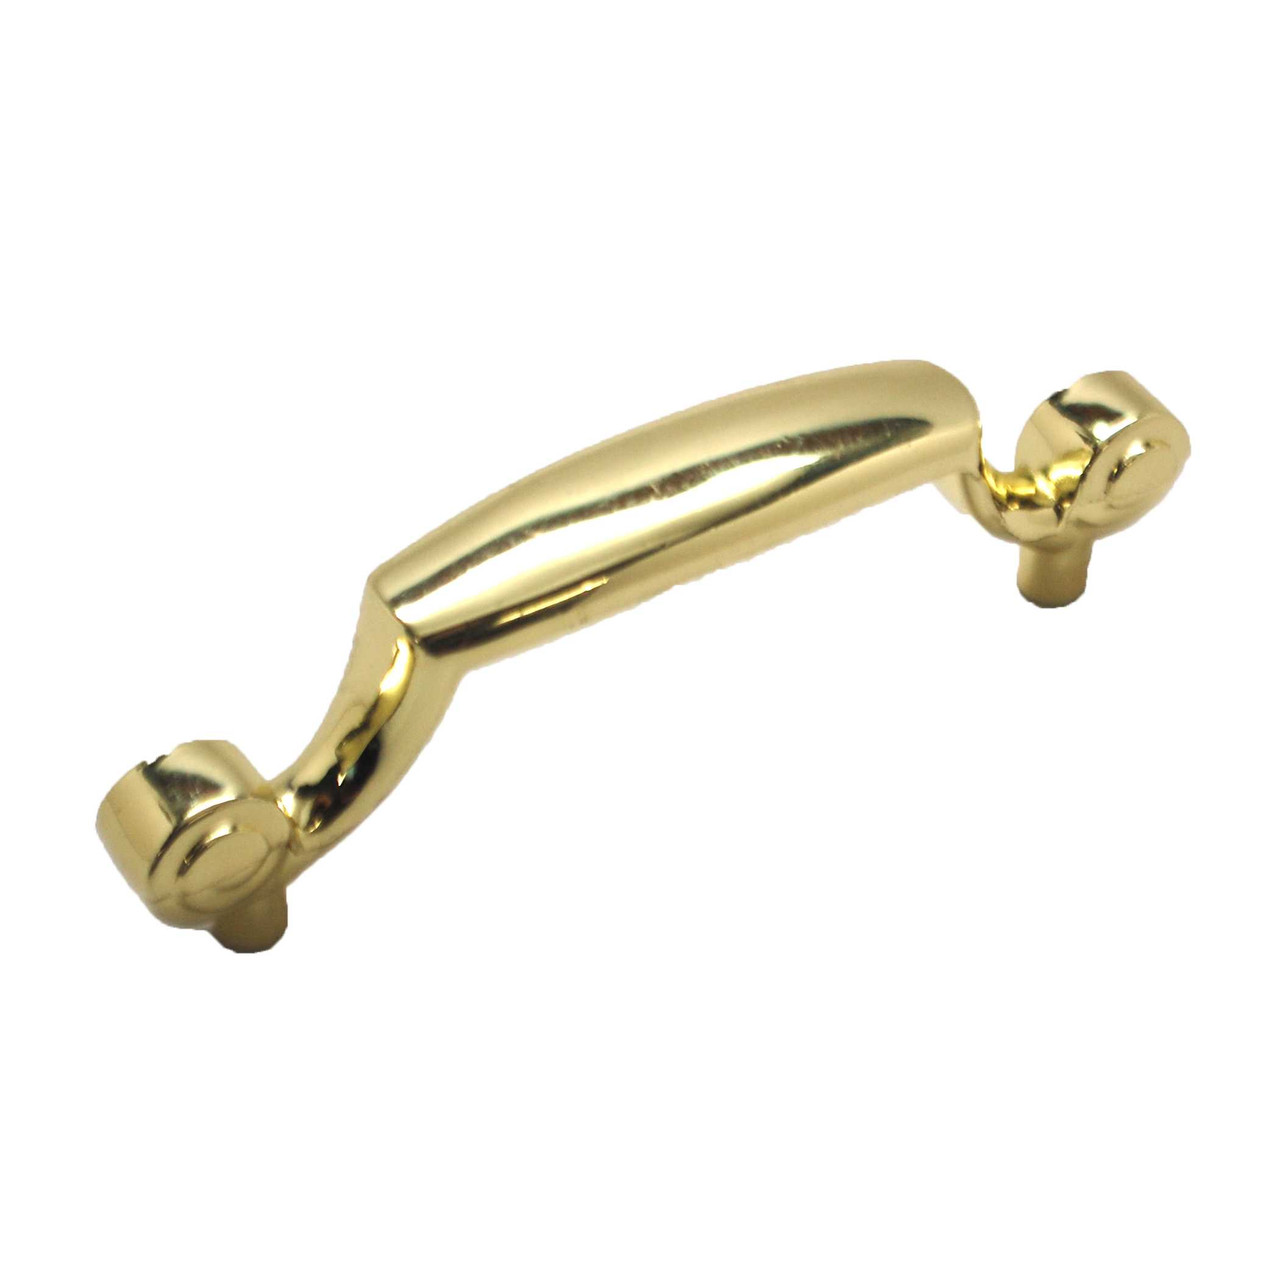 BELWITH 3 Center to Center Handle Cabinet Pull - Polished Brass P537-PB